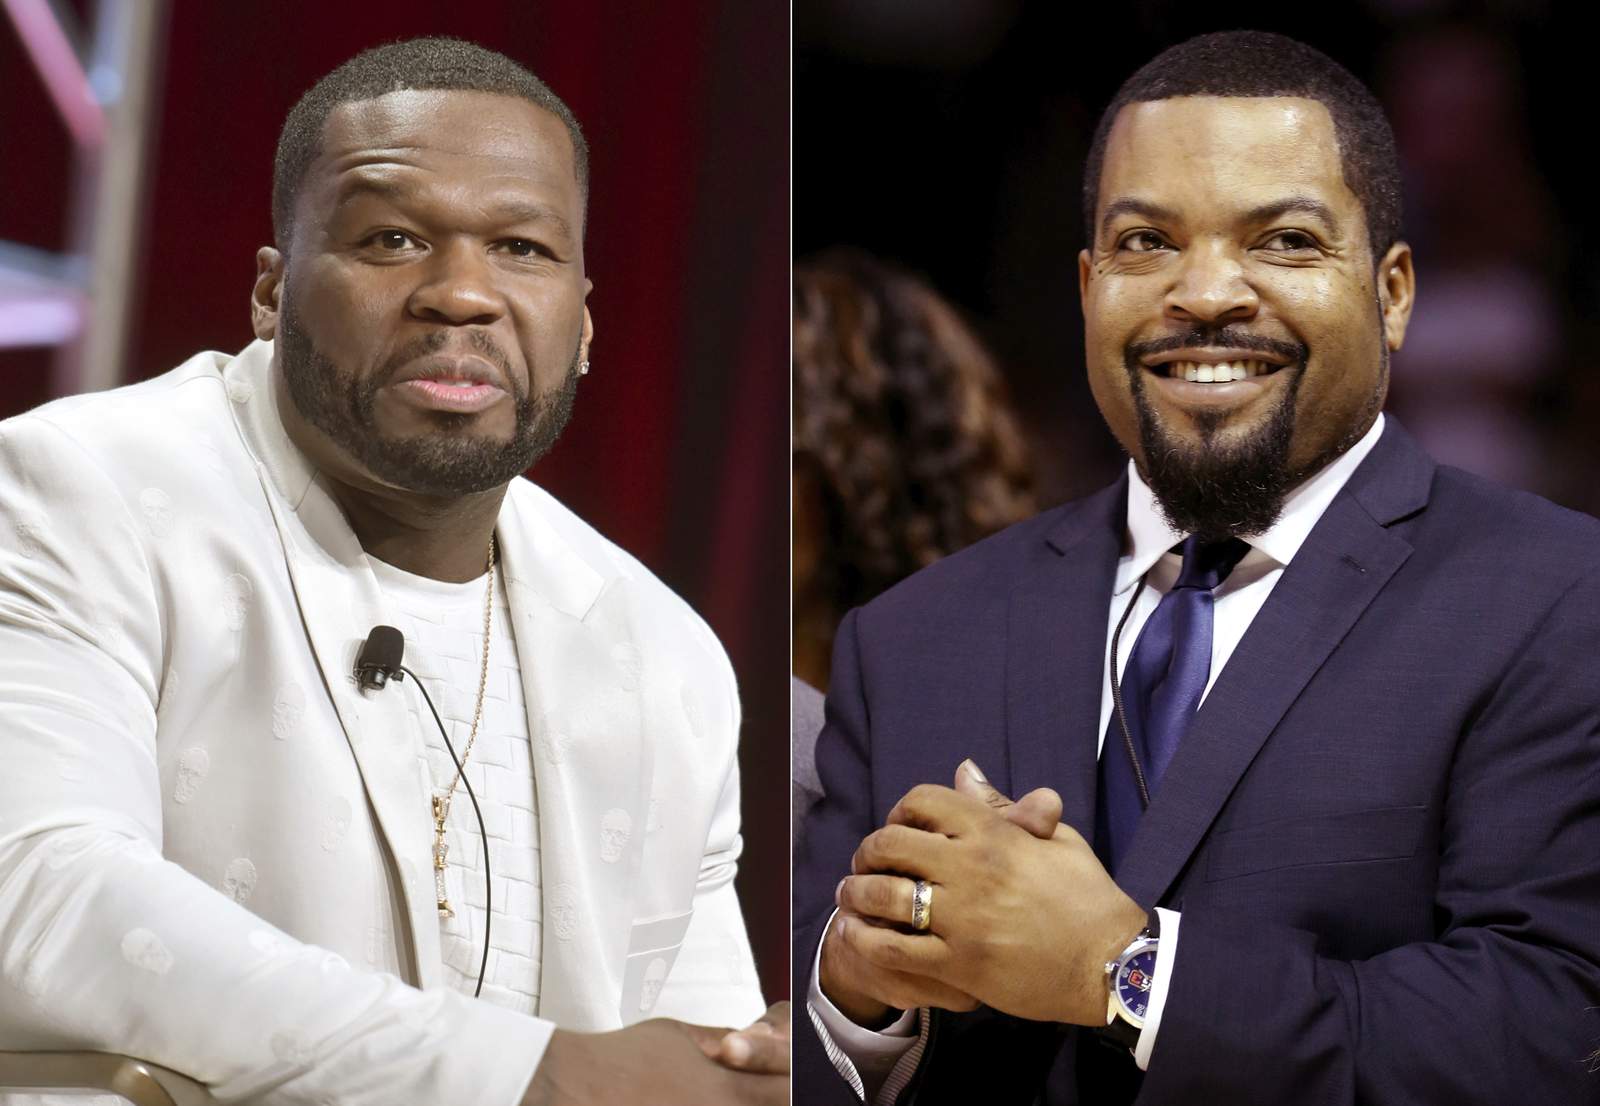 Photo altered to Ice Cube, 50 Cent in ‘Trump 2020’ hats